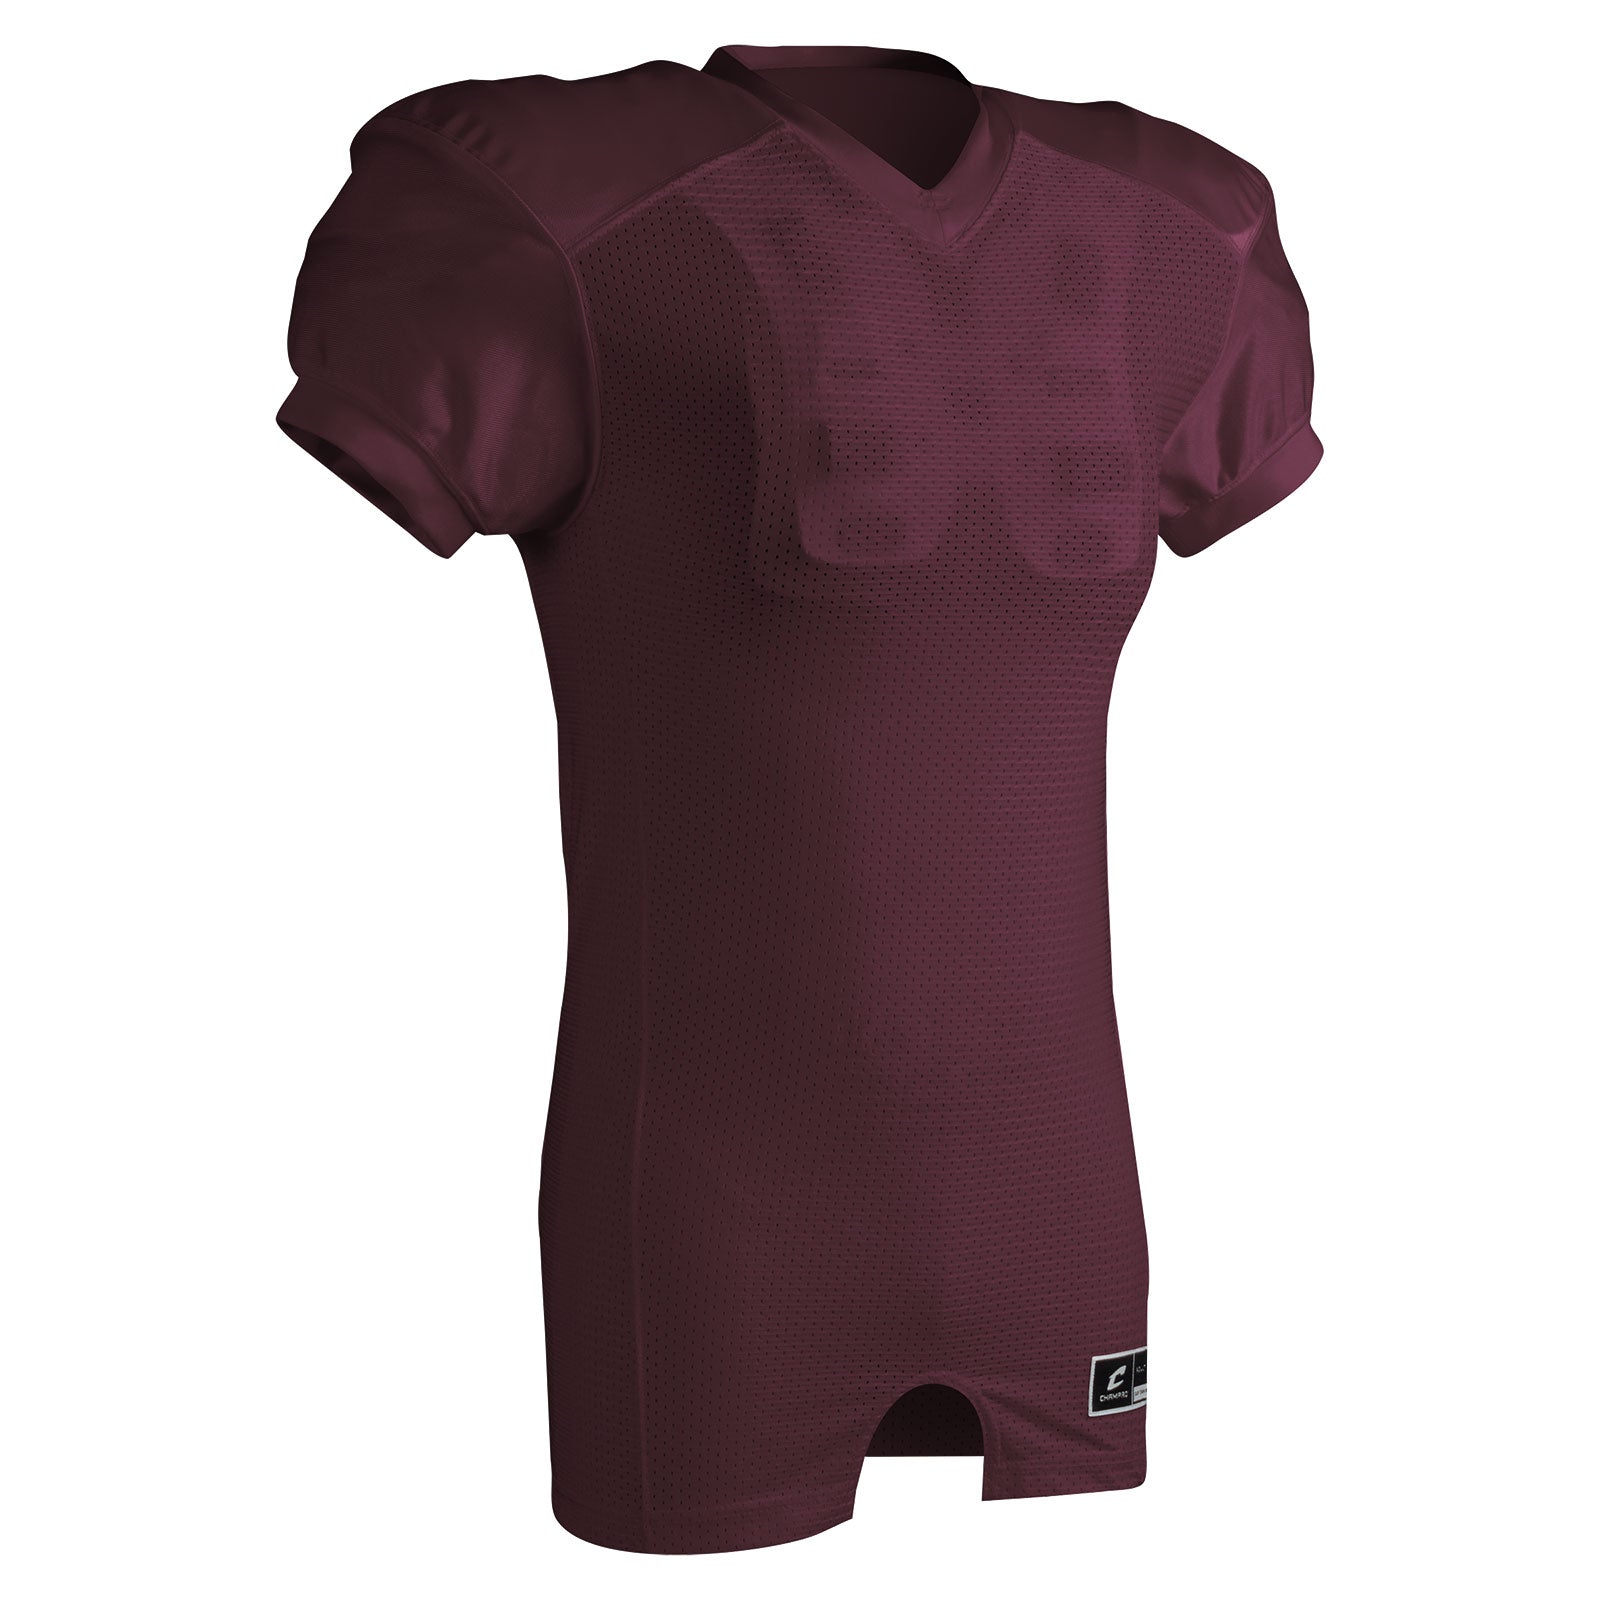 Pro-Fit Collegiate Fit Football Game Jersey MAROON BODY